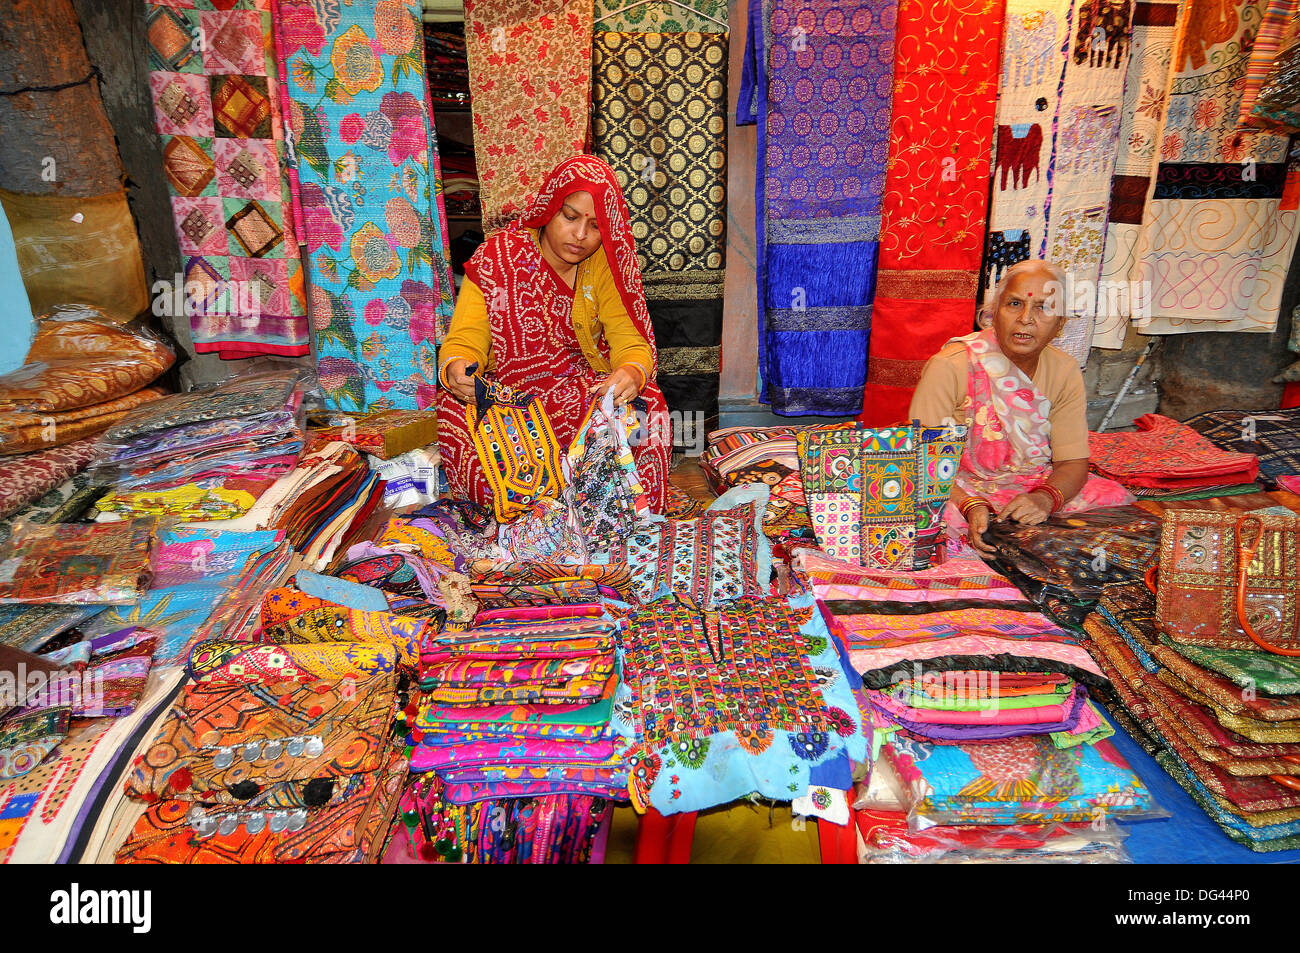 Ladies Purse Wholesale Market In Delhi | Confederated Tribes of the Umatilla Indian Reservation